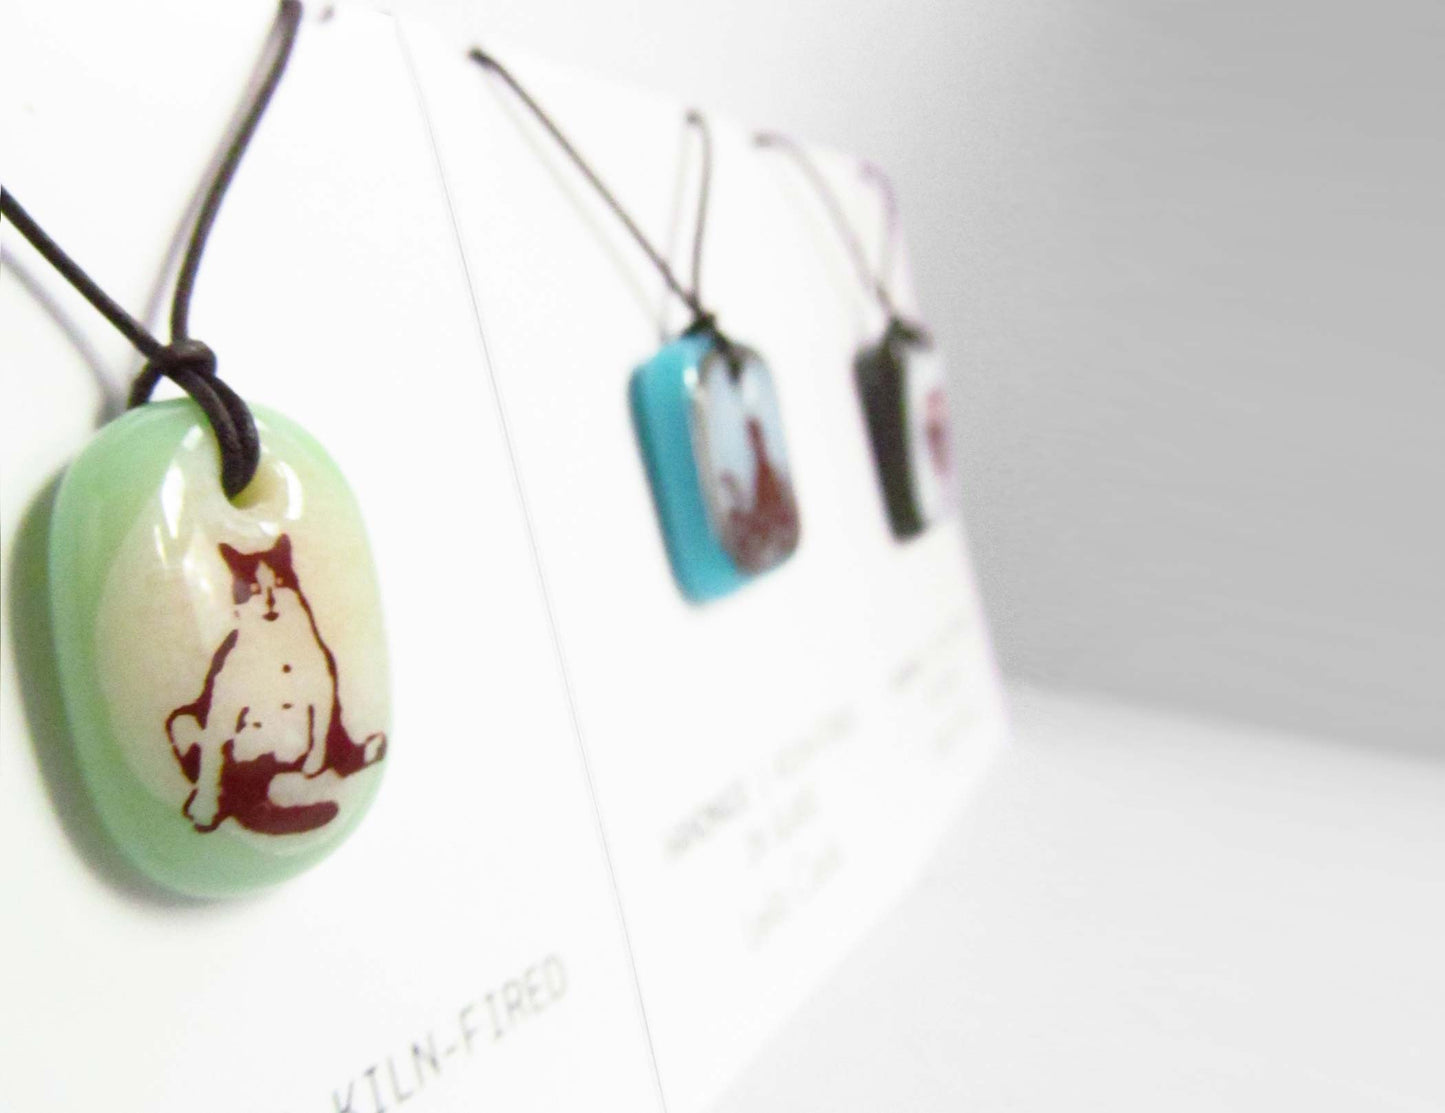 Two Birds in a Tree Jewellery handmade by Leila Cools. 